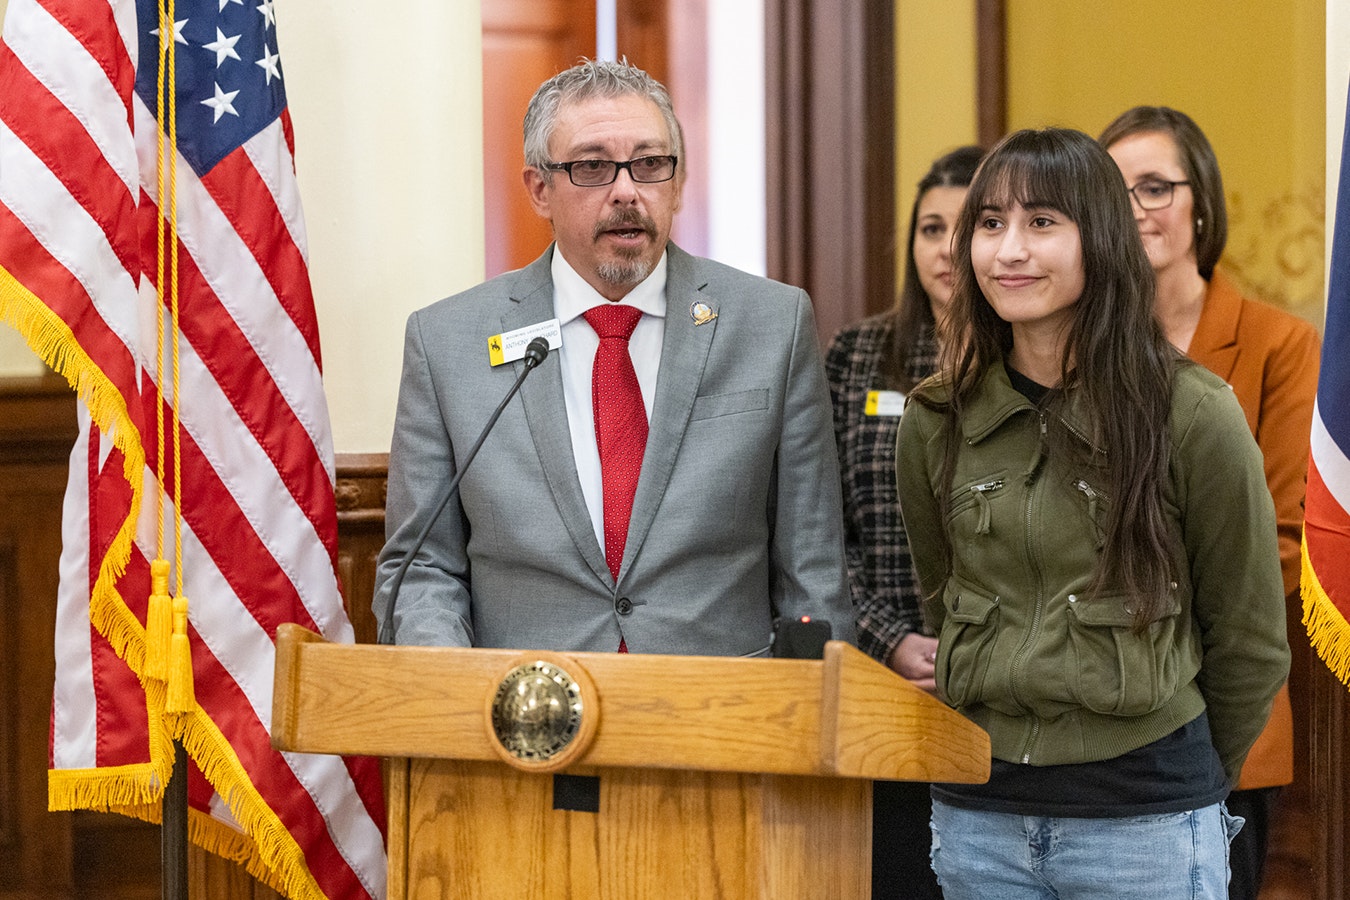 State Sen. Anthony Bouchard, R-Cheyenne, and Chloe Cole, a California activist who detransitioned to go back to being a girl. She testified in favor of Senate File 99.